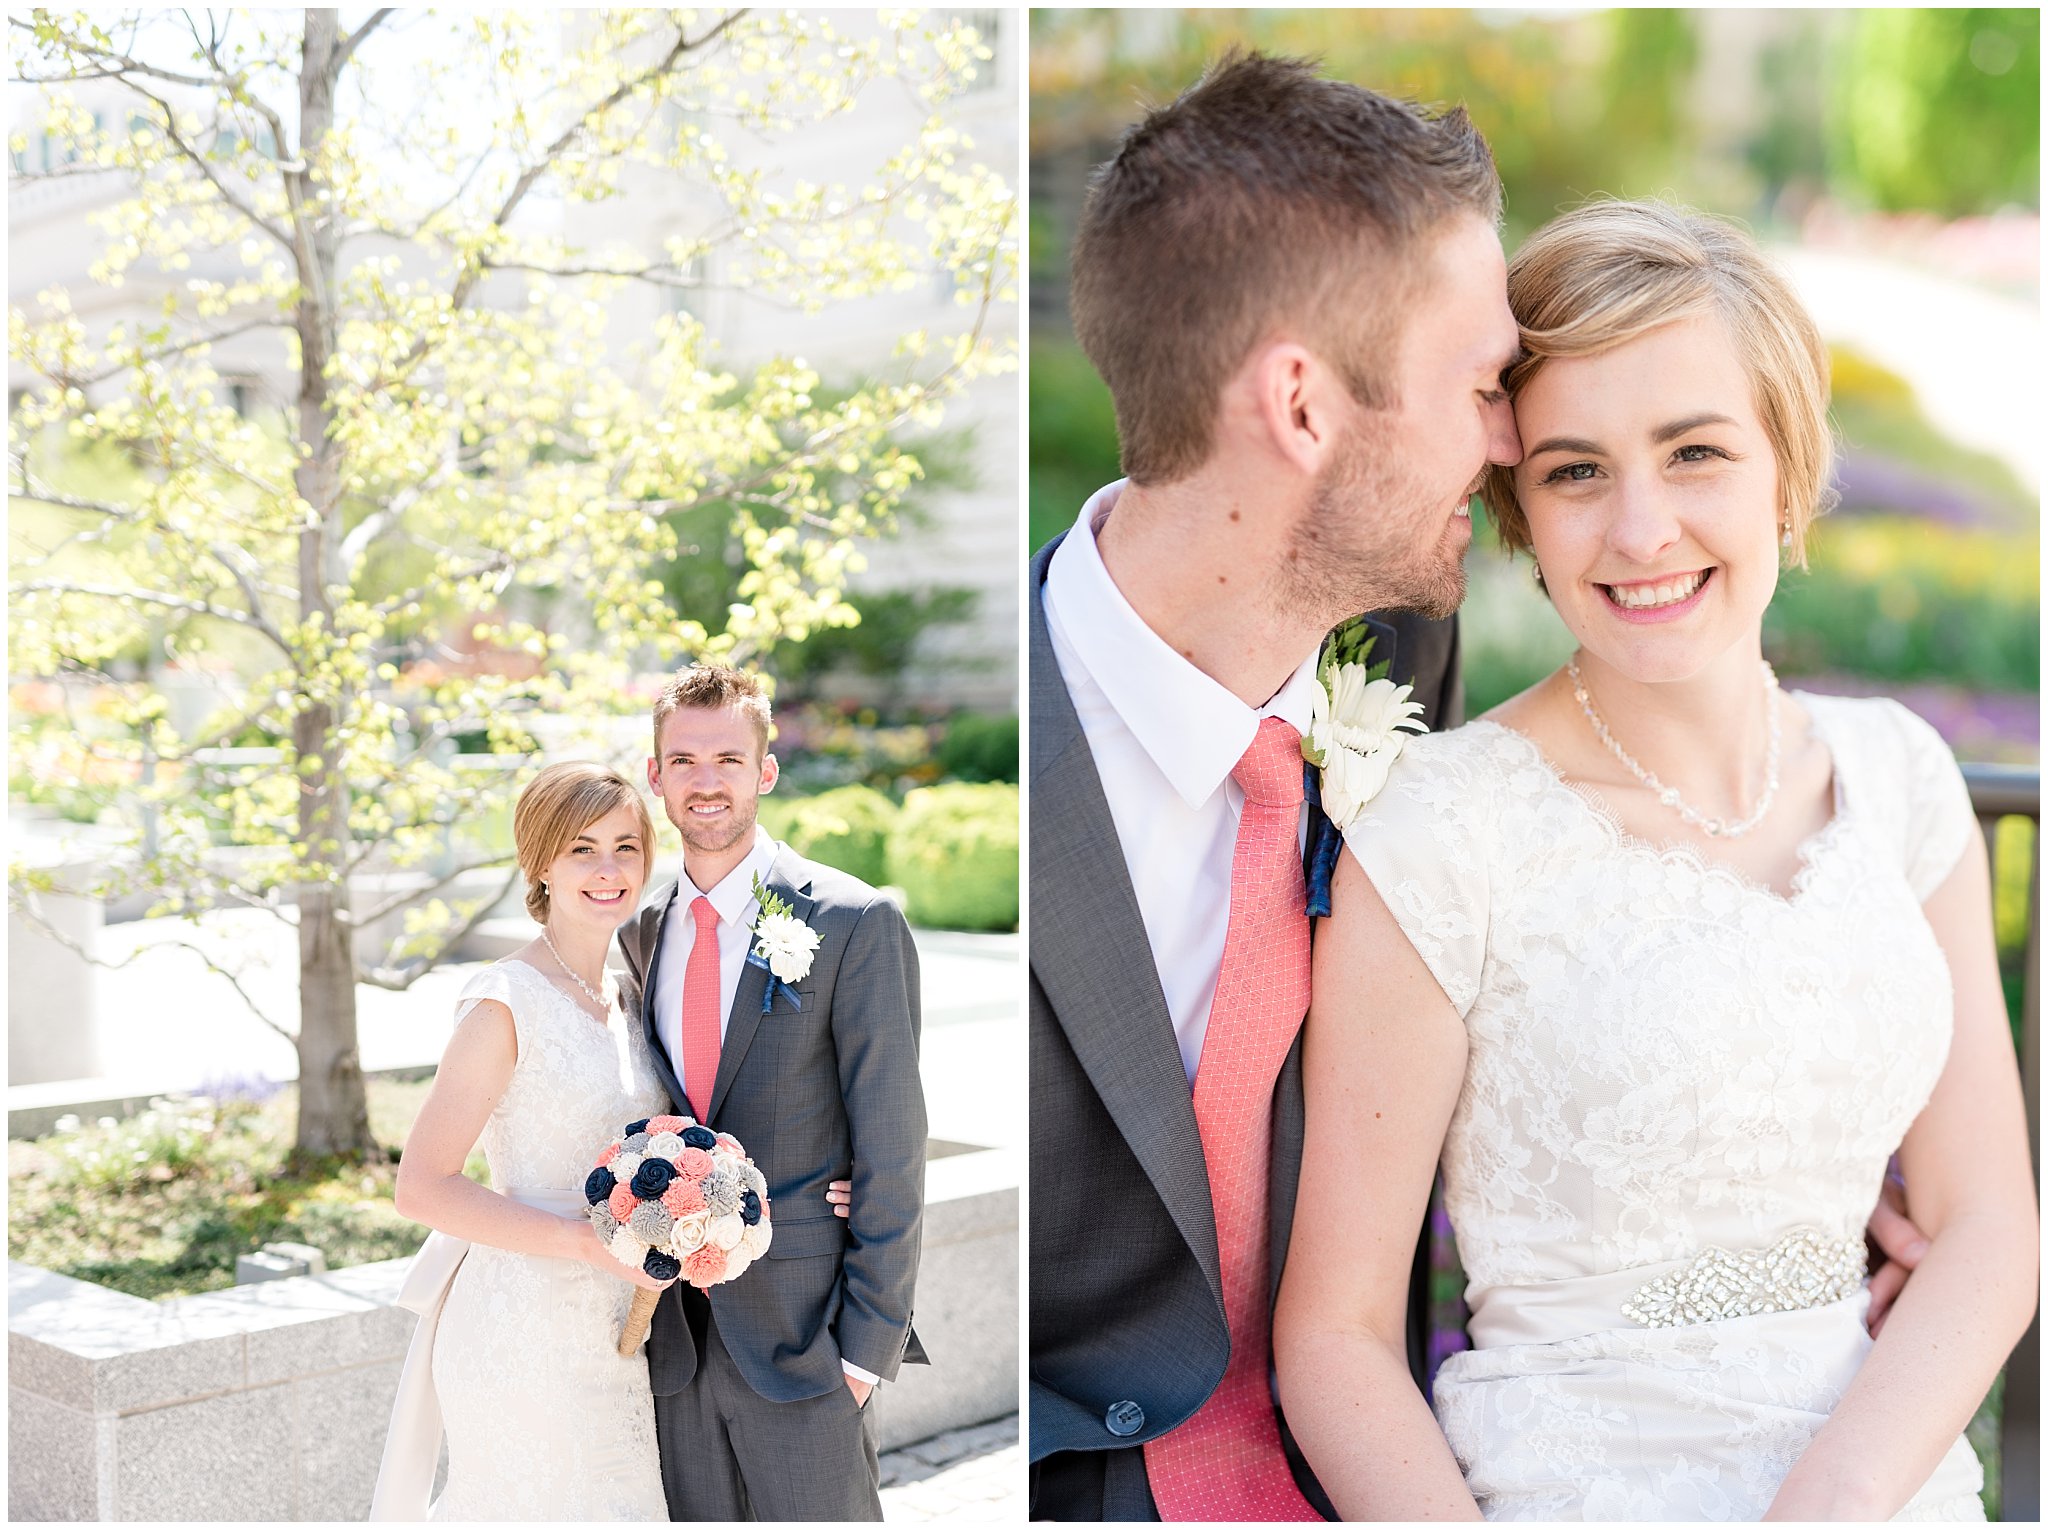 Salt Lake Temple spring wedding | Coral and grey wedding | Bride and groom pictures at the temple